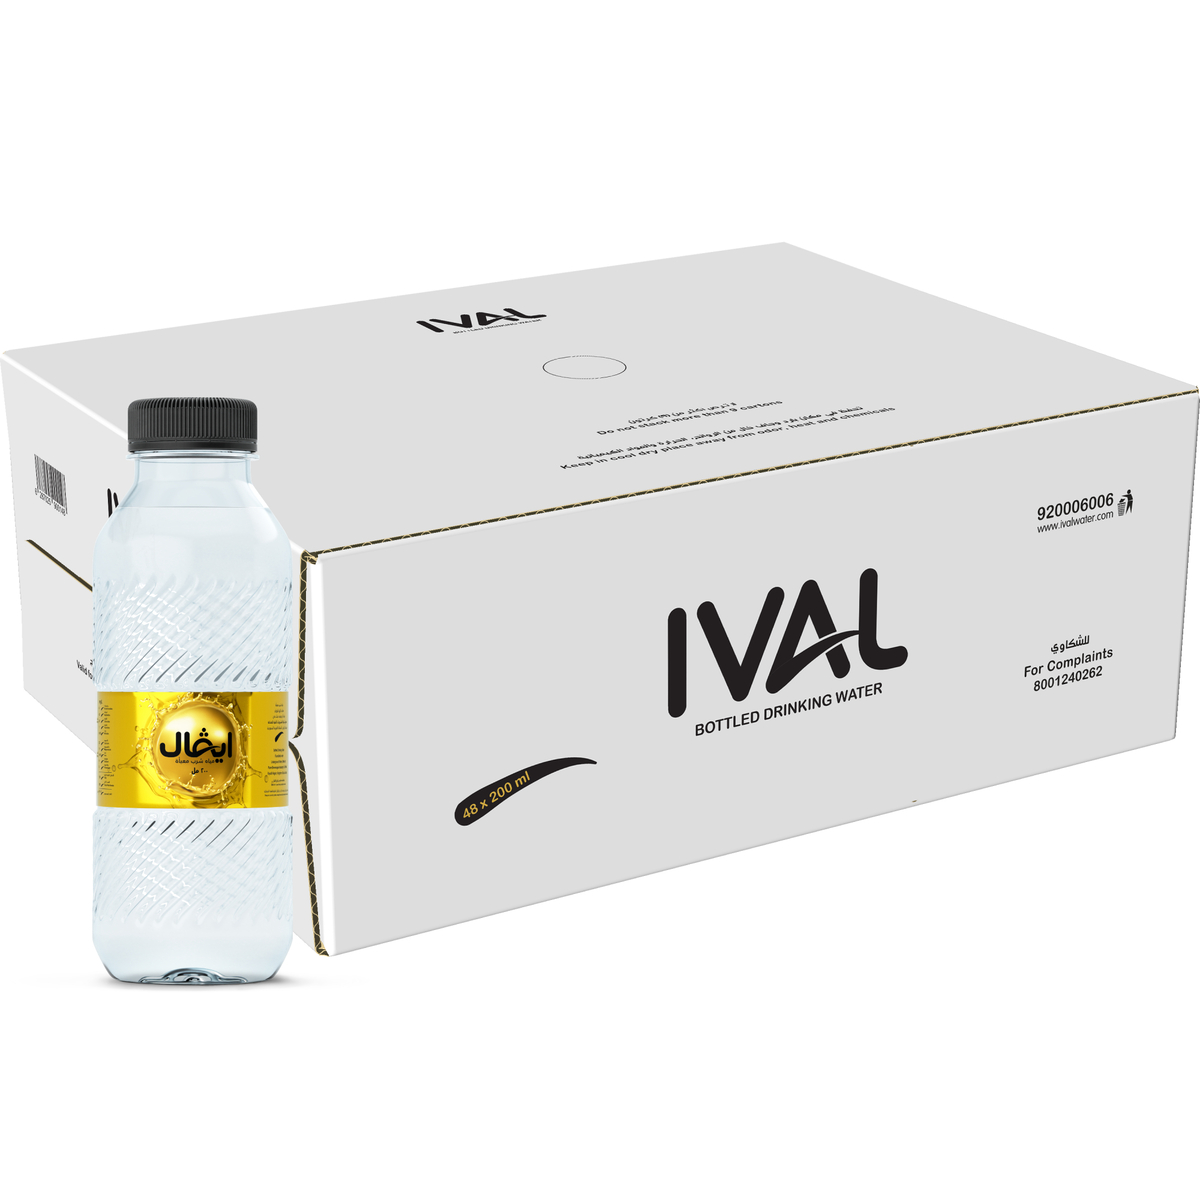 Ival Bottled Drinking Water 48 x 200ml